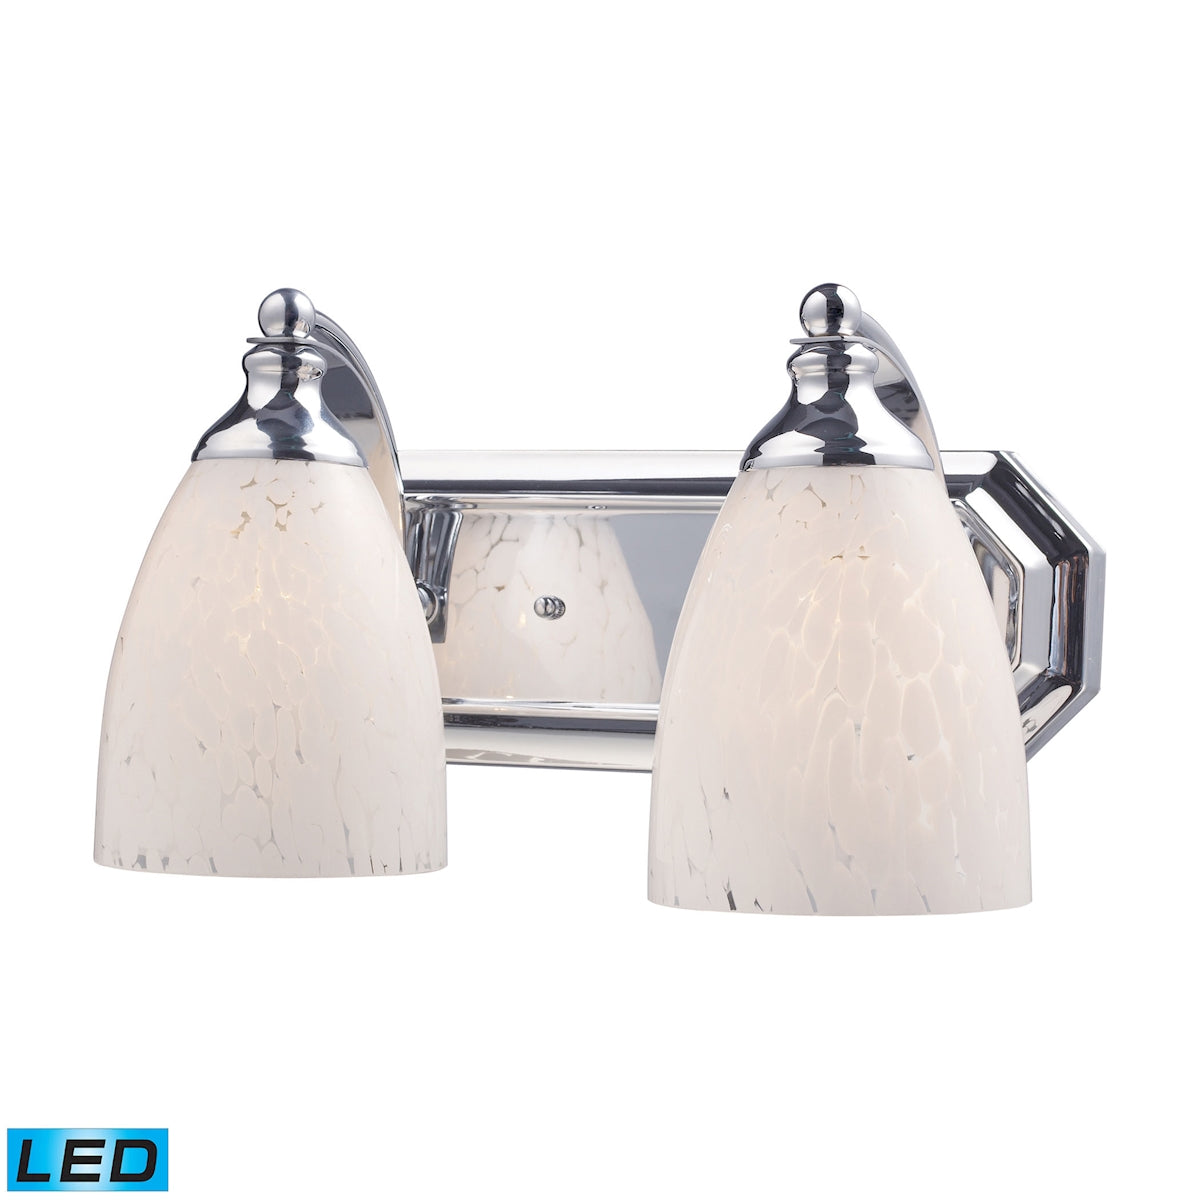 ELK Lighting 570-2C-SW-LED Mix and Match Vanity 2-Light Wall Lamp in Chrome with Snow White Glass - Includes LED Bulbs